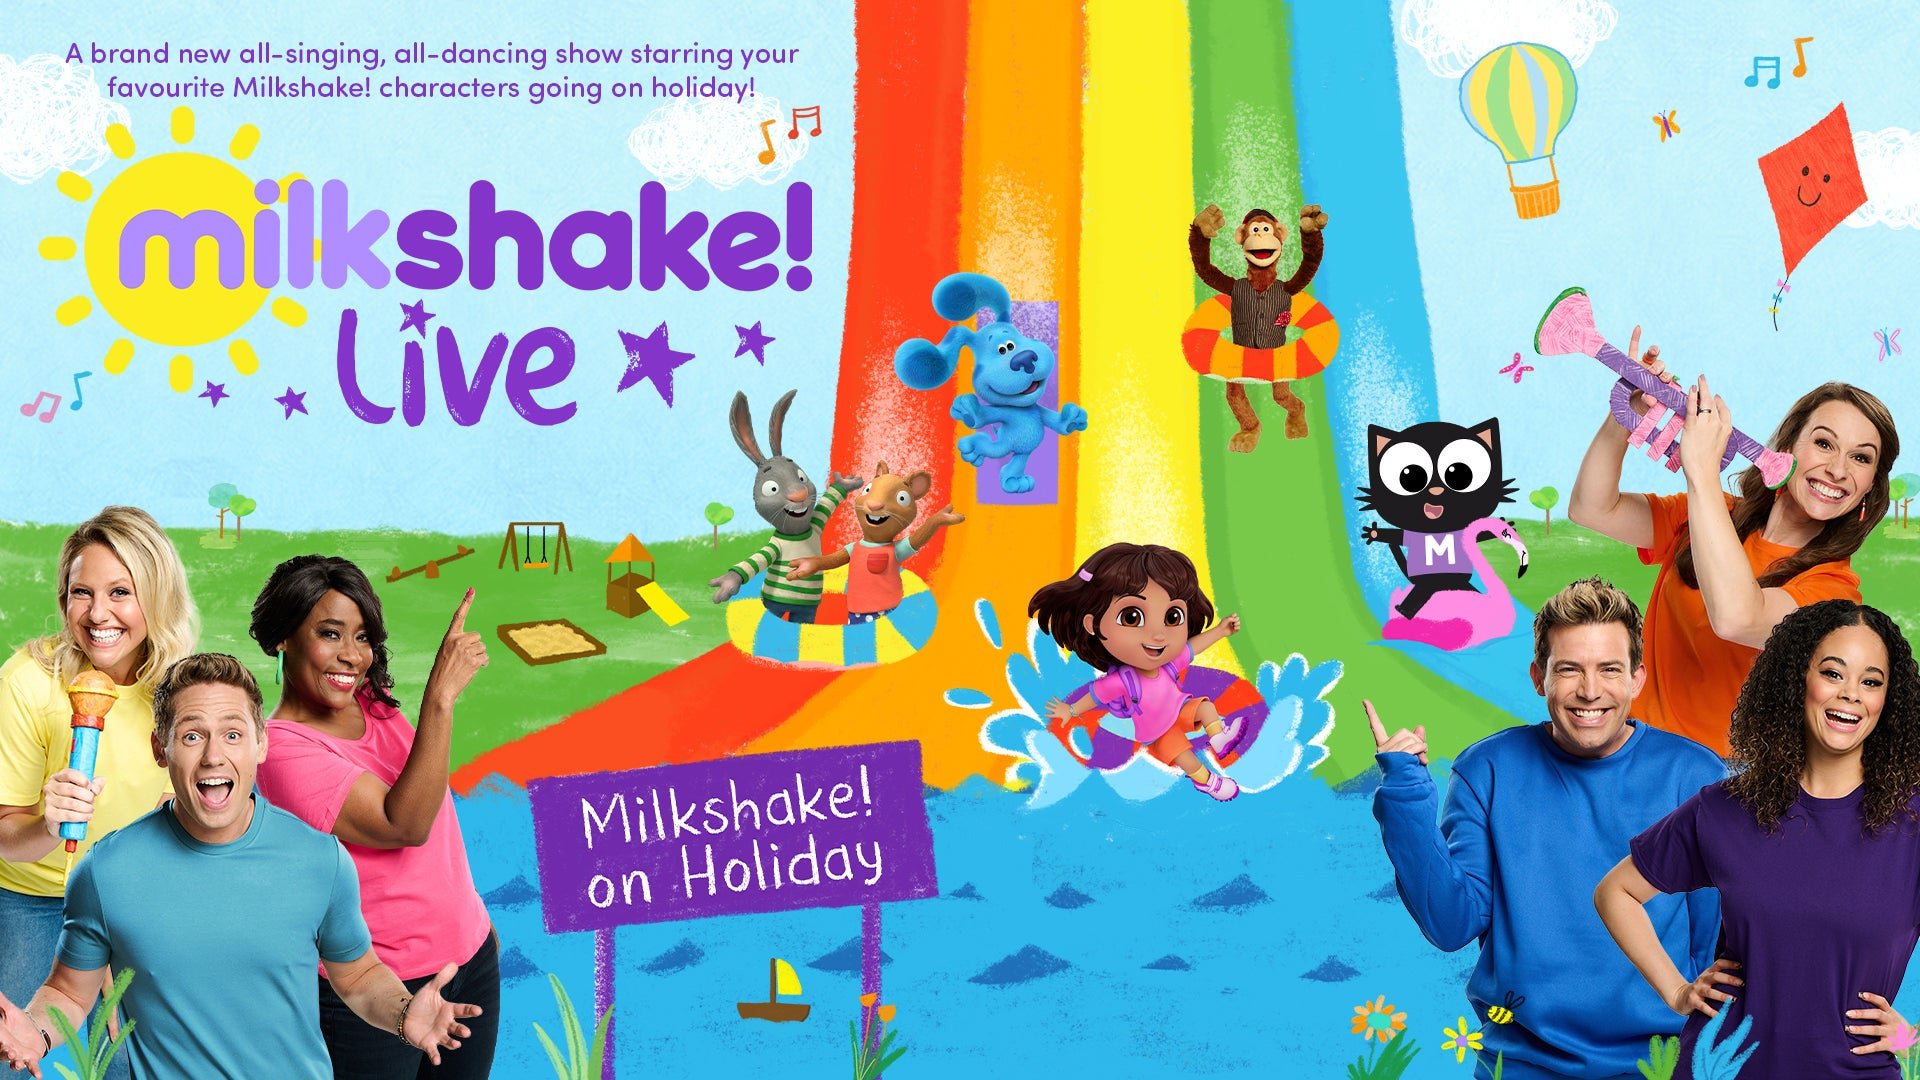 Image name Milkshake Live on Holiday at Scarborough Spa Theatre Scarborough the 1 image from the post Milkshake! Live on Holiday at Scarborough Spa Grand Hall, Scarborough in Yorkshire.com.